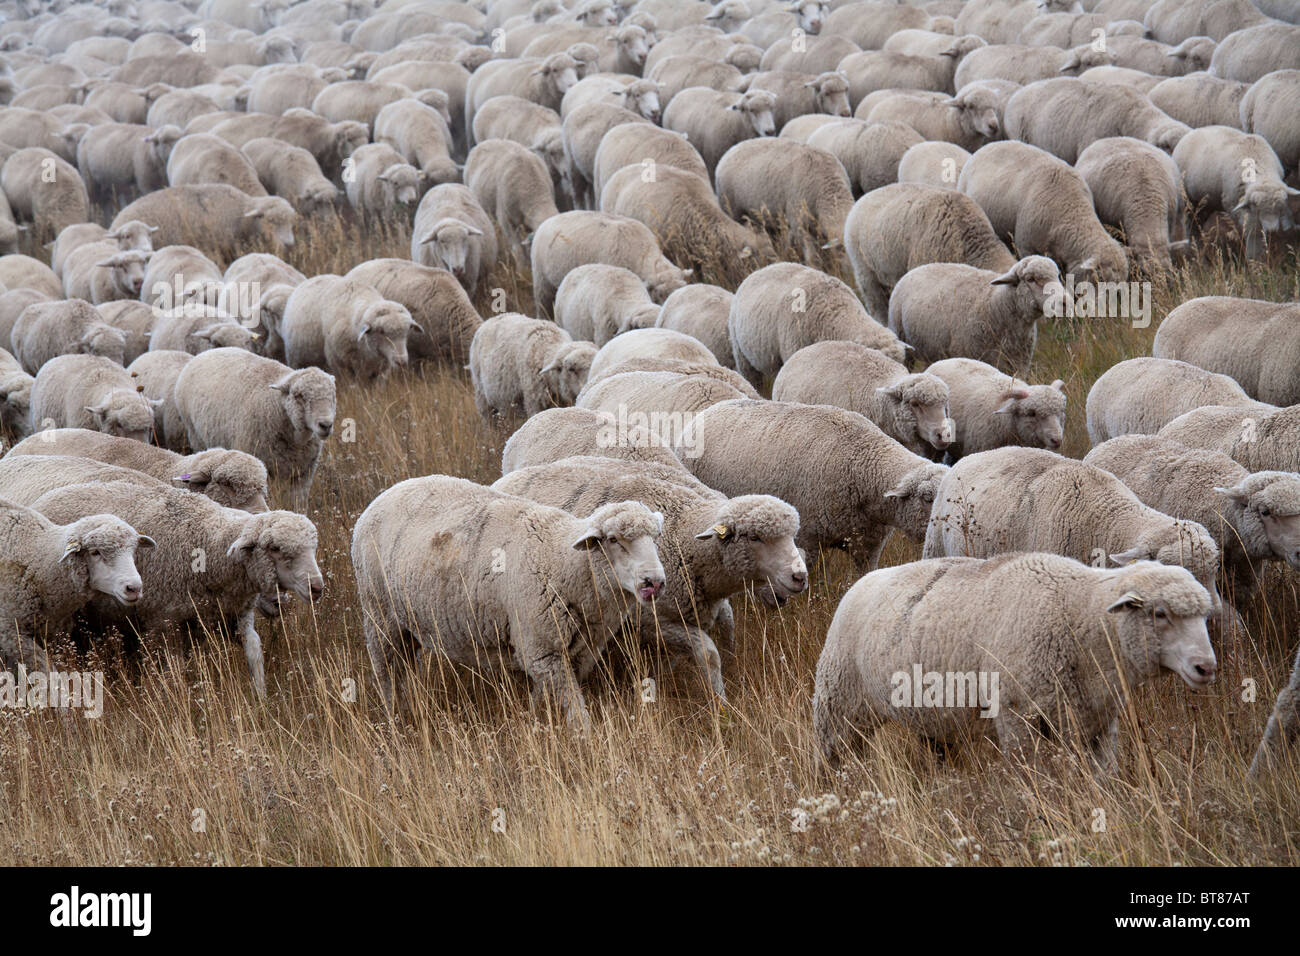 Manassa, Colorado - A flock of sheep is moved to a winter pasture in Colorado's San Luis Valley. Stock Photo